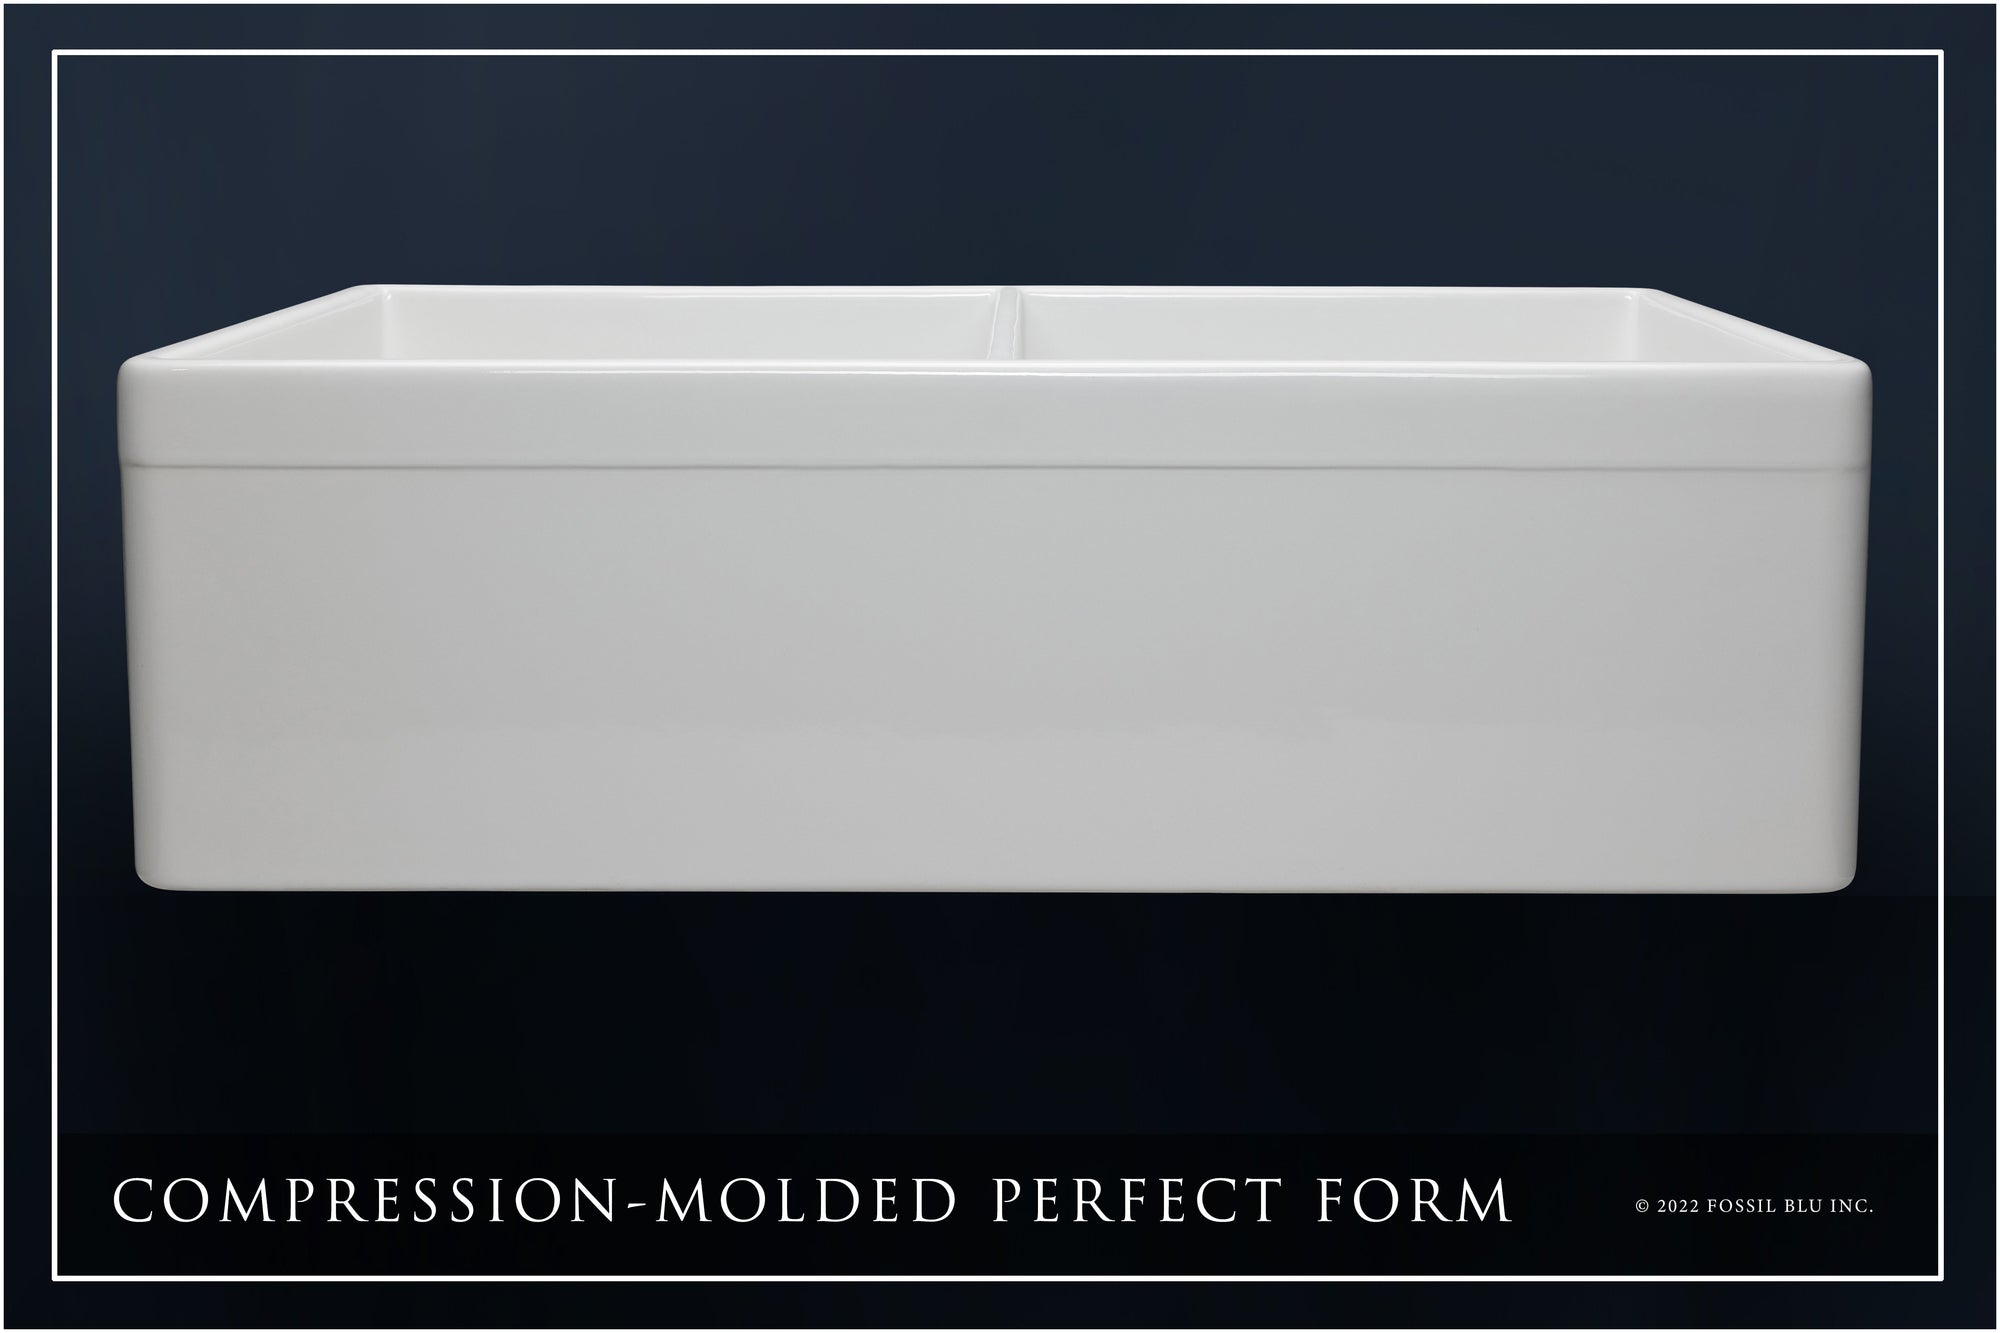 FSW1012MB LUXURY 33-INCH SOLID FIRECLAY FARMHOUSE SINK IN WHITE, MATTE BLACK ACCS, BELTED FRONT